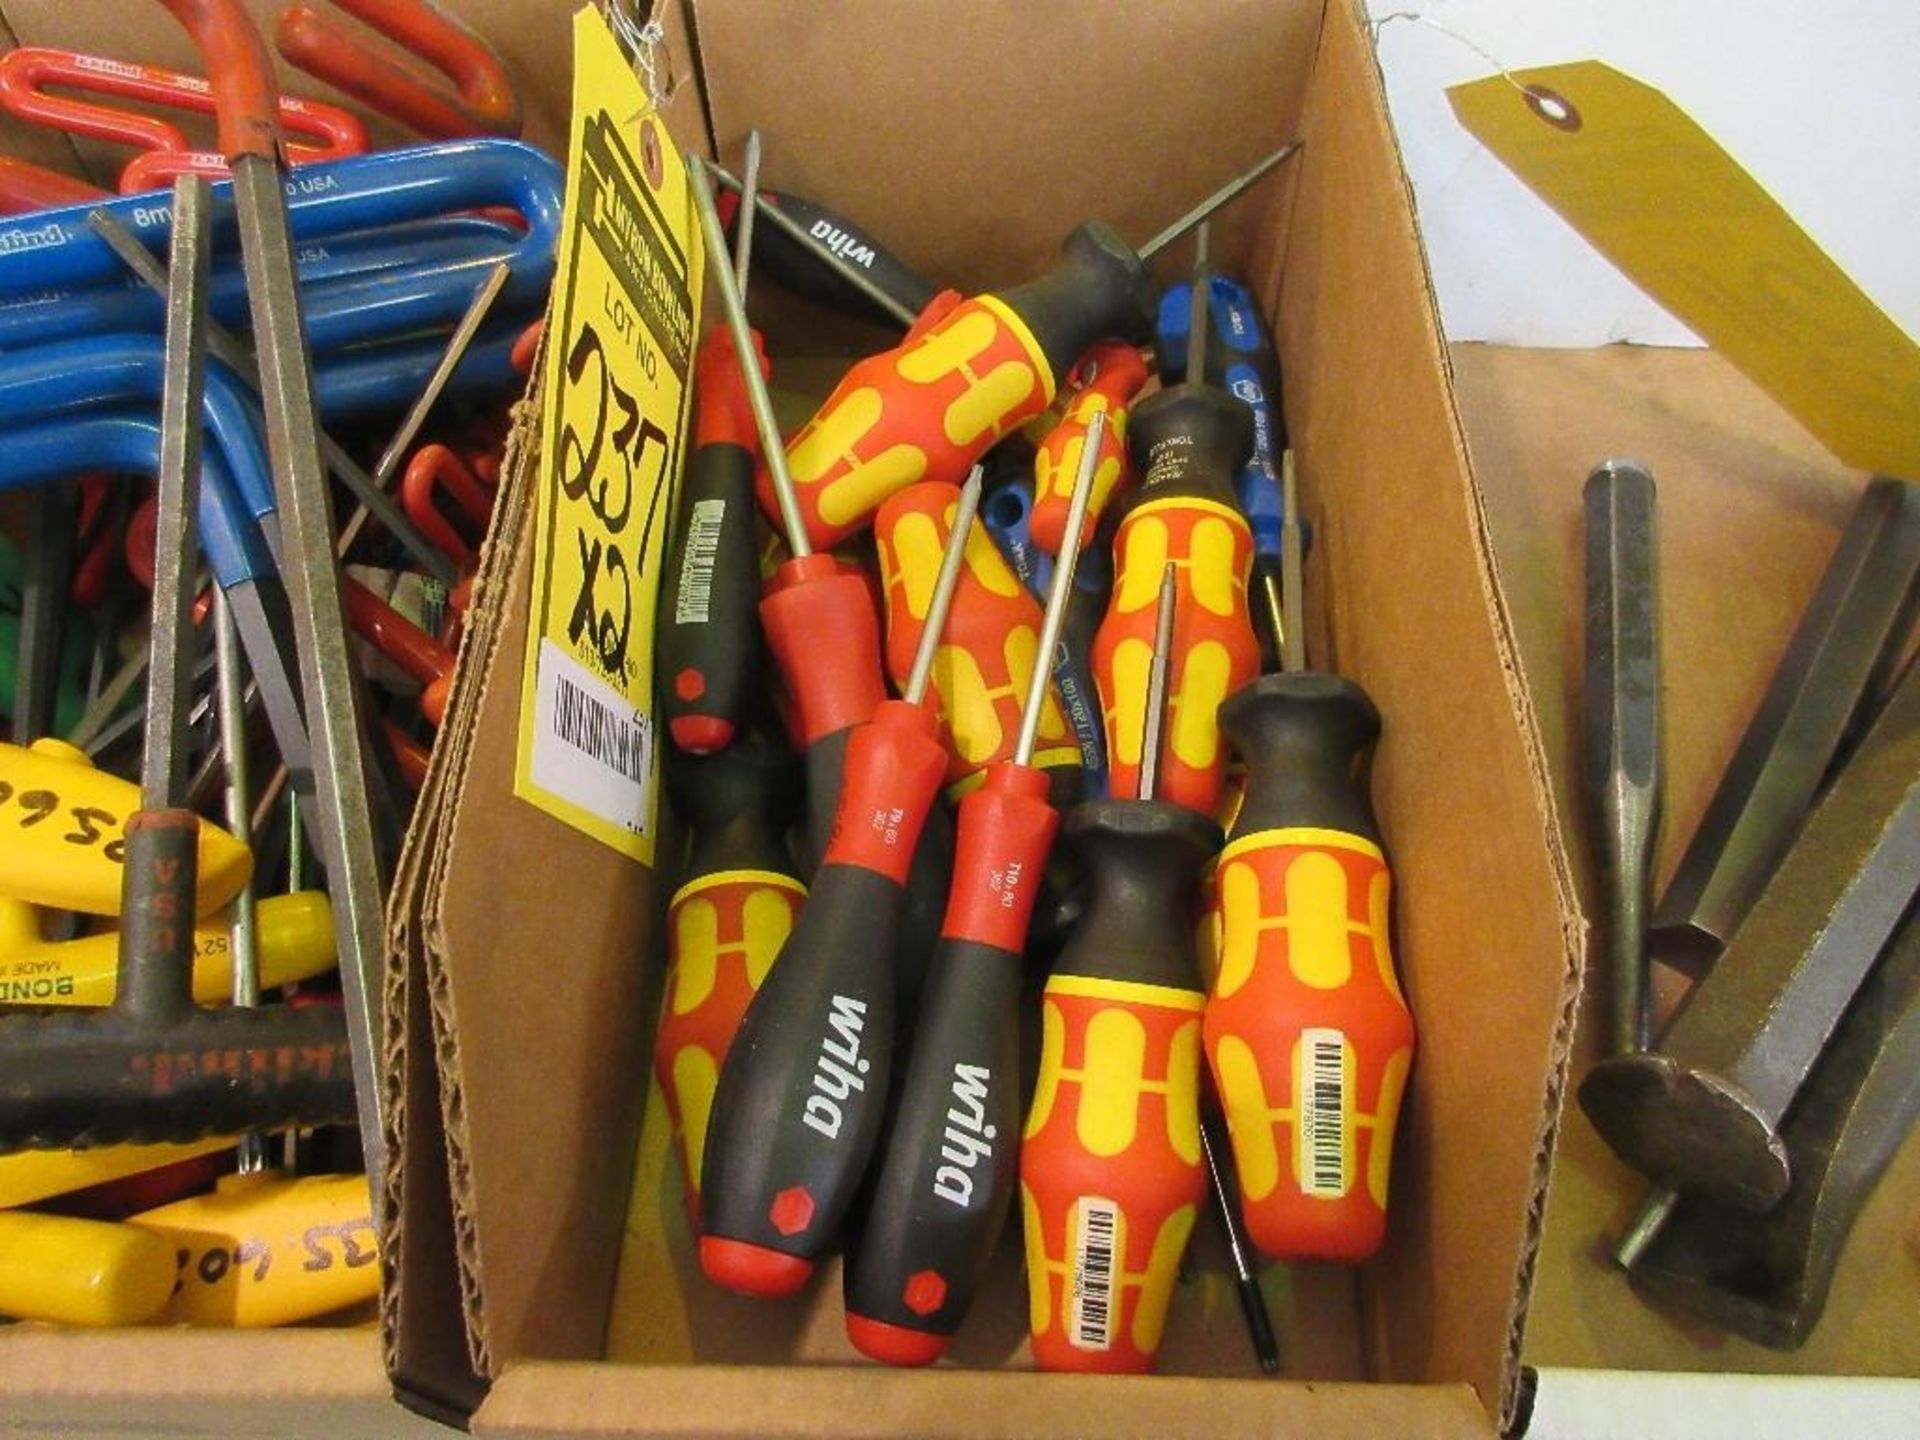 (2) BOXES OF SCREWDRIVERS/TORX DRIVERS